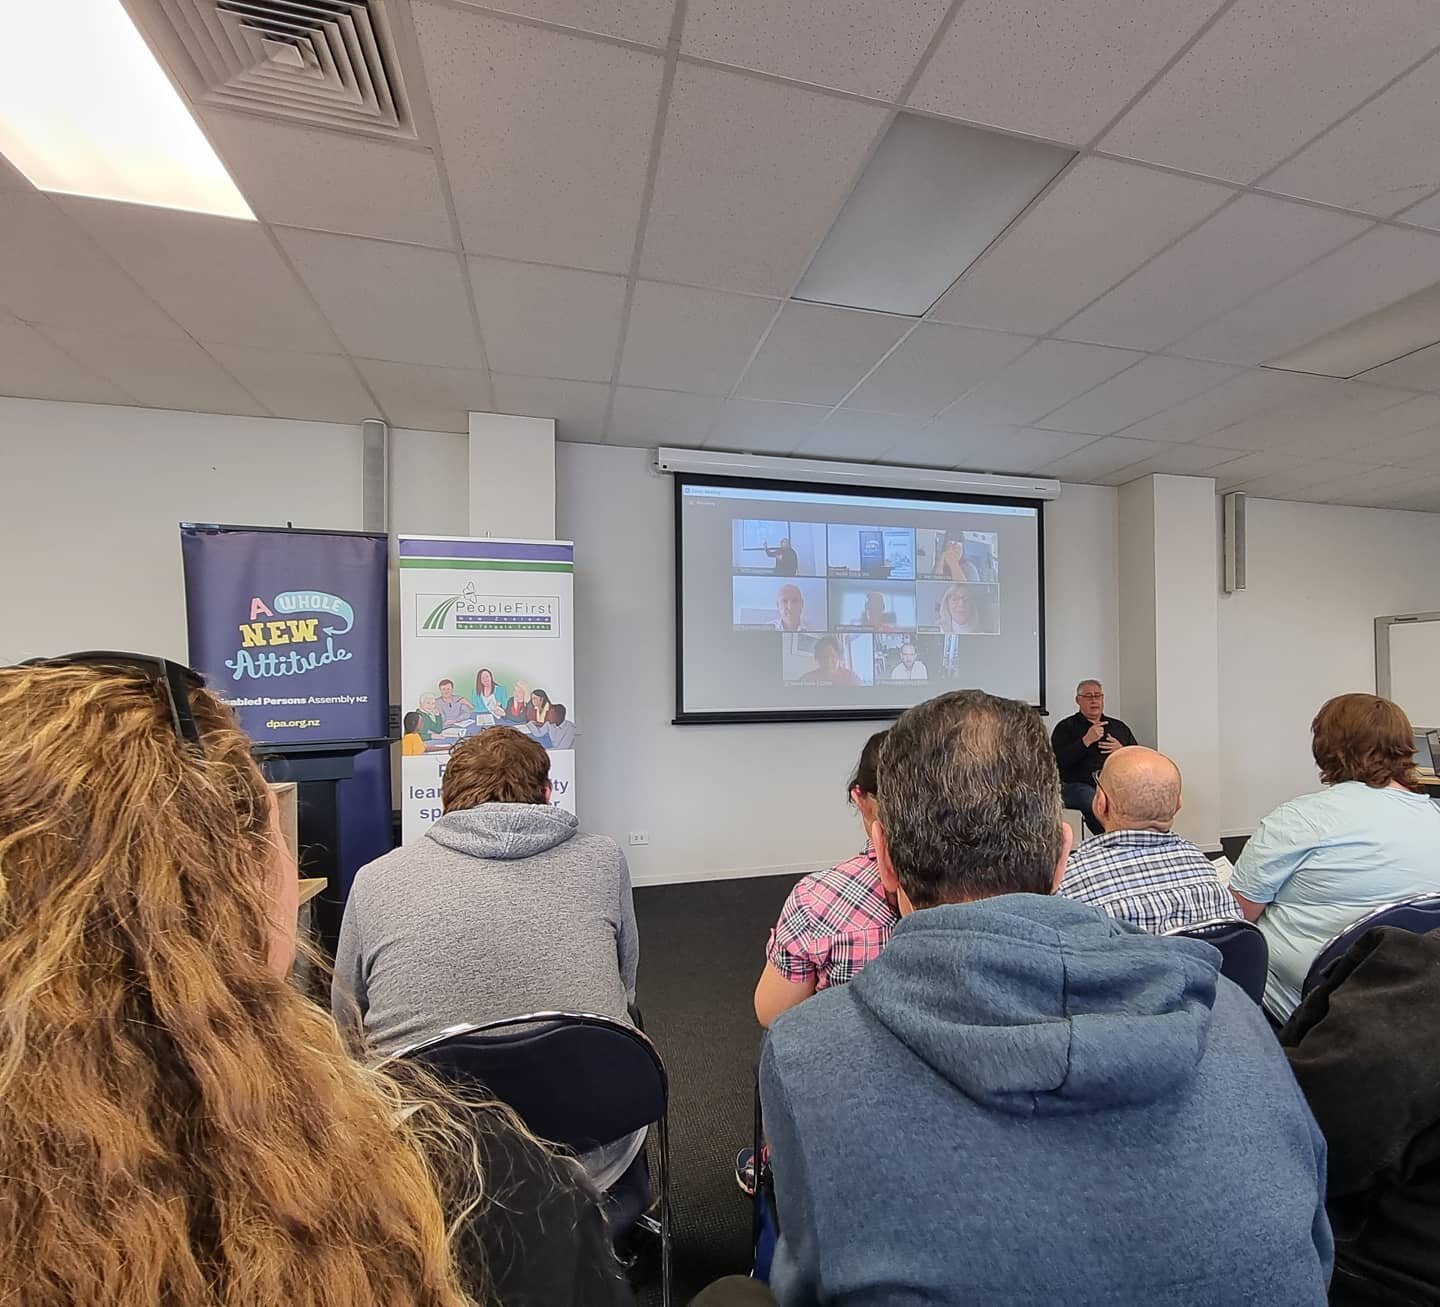 Whānau Whanake is proud to have been invited to speak with MOH today around the COVID-19 Vaccine Programme. Our aim is to collate information to support whānau to make informed decisions. 

#covid19vaccine
#enablinggoodlives